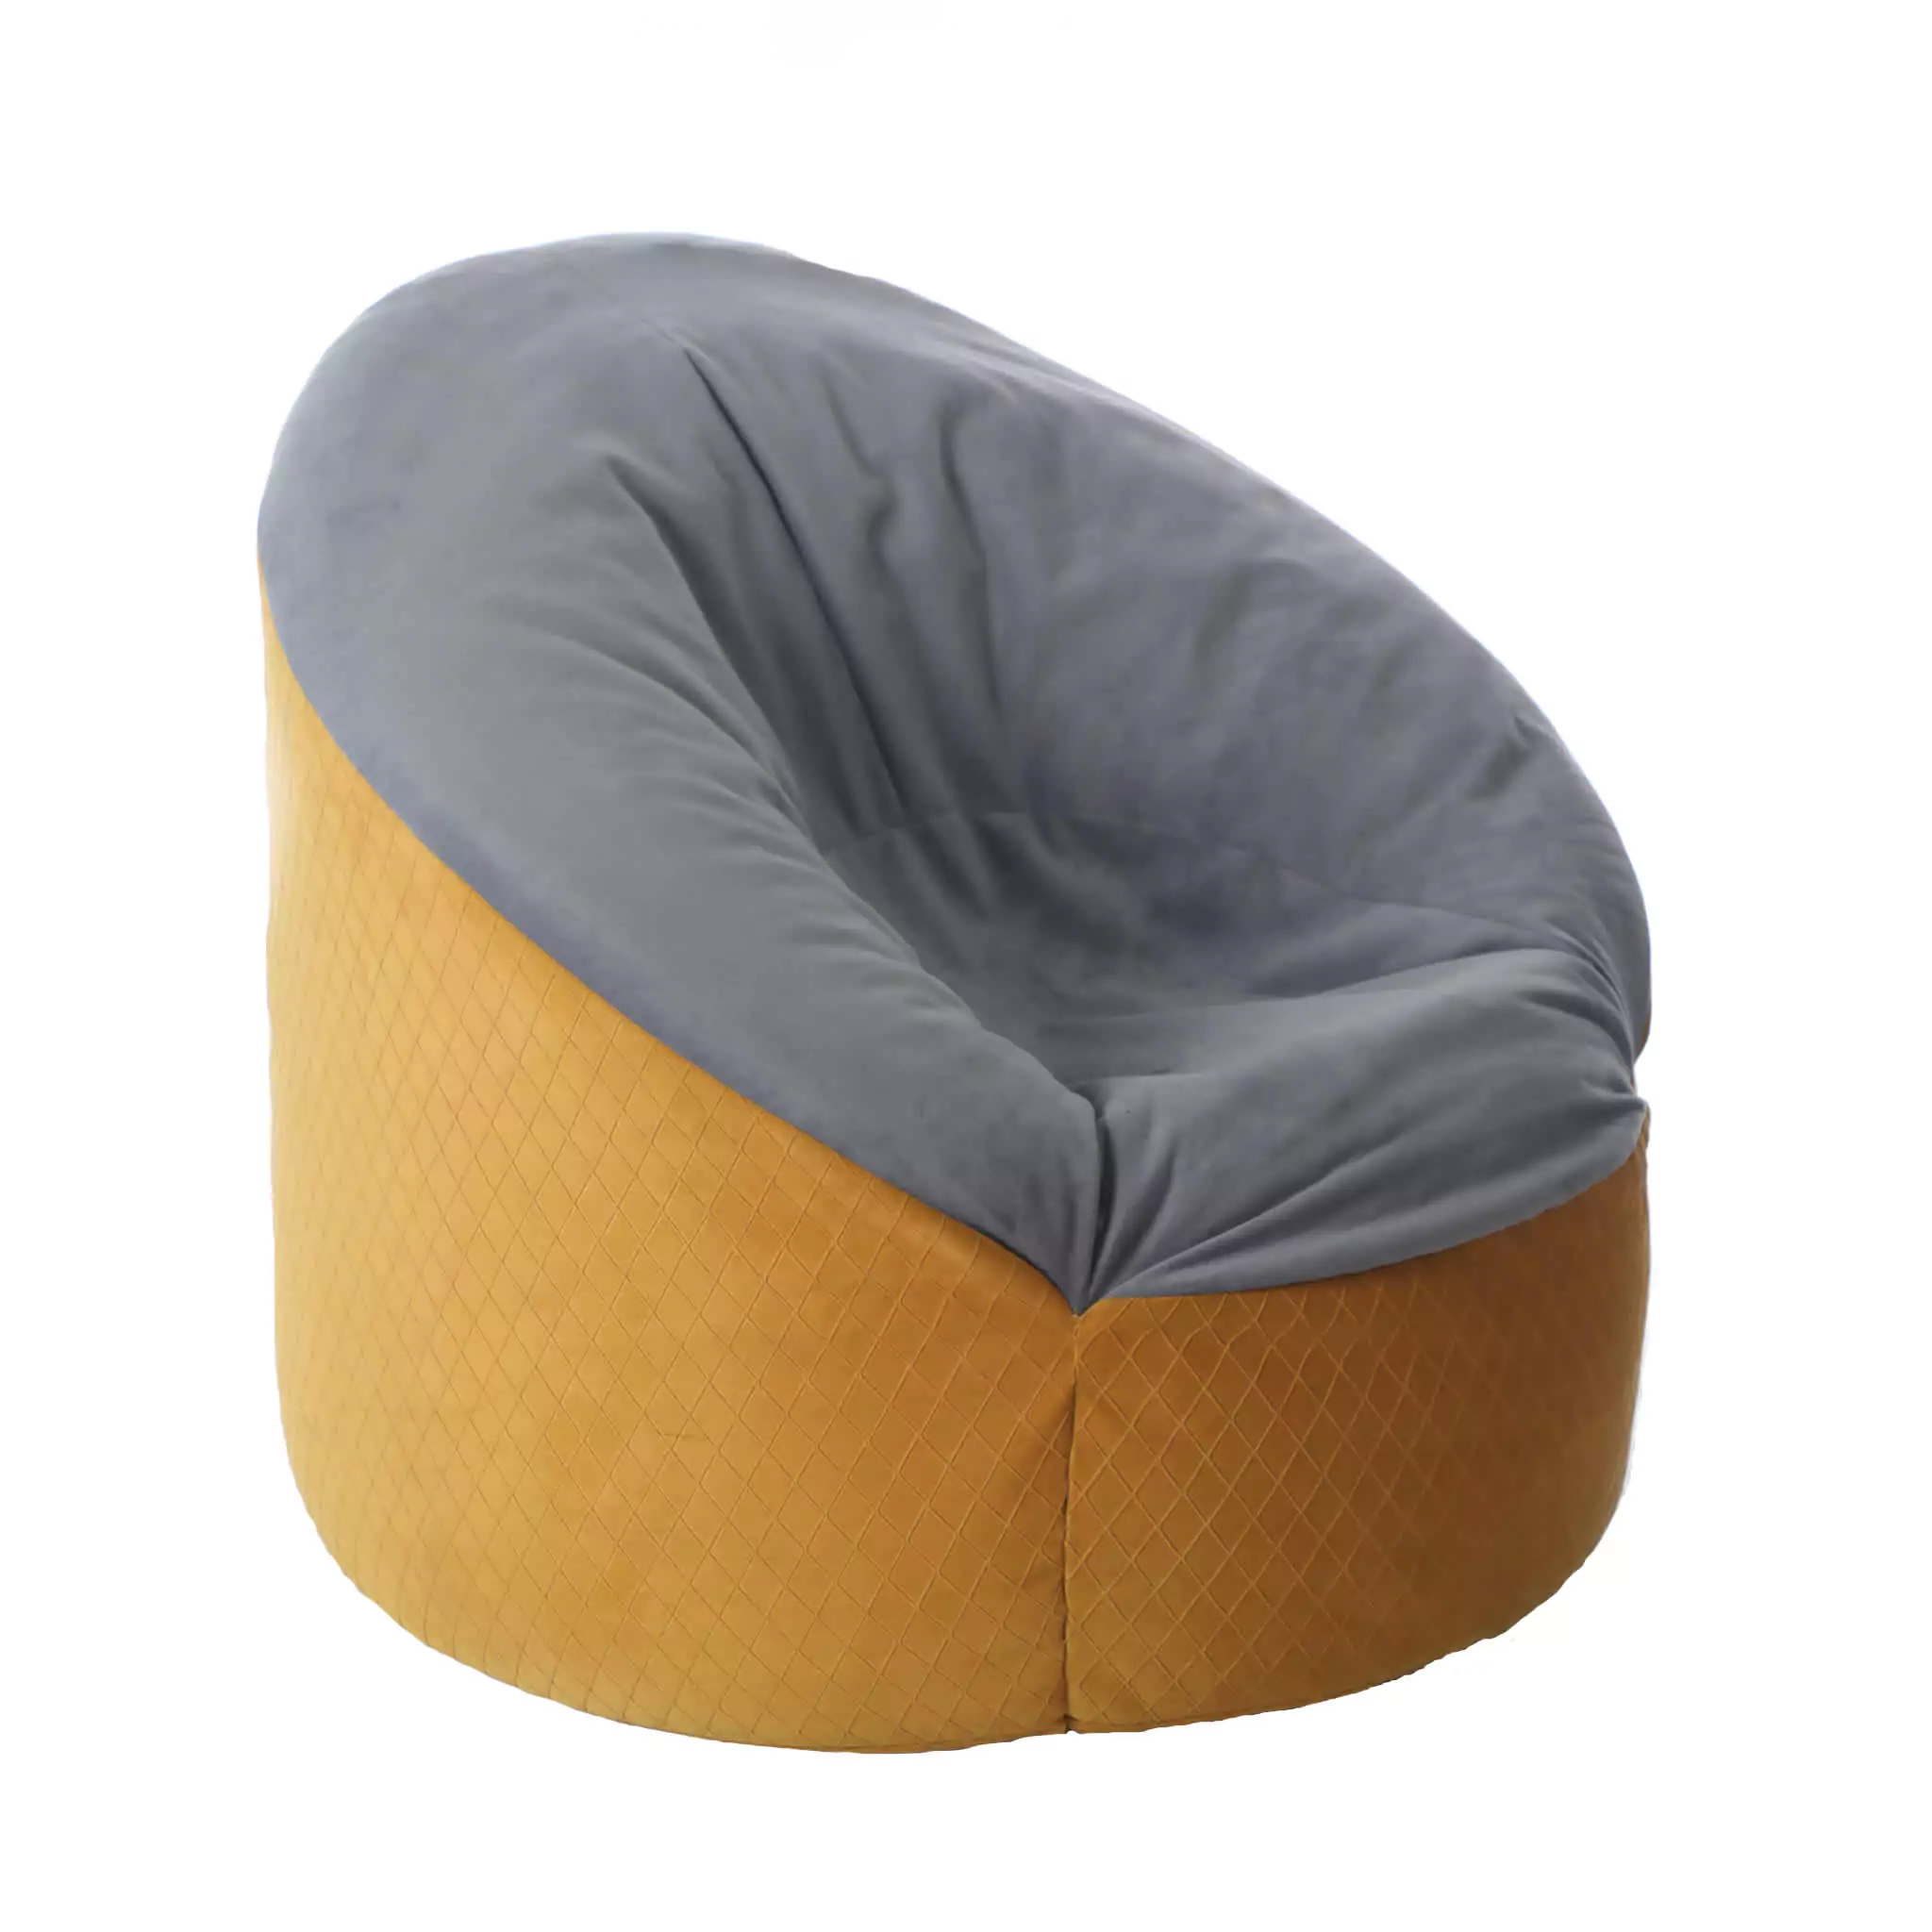 Simko Seating Products Foyer Seat Bean Bag